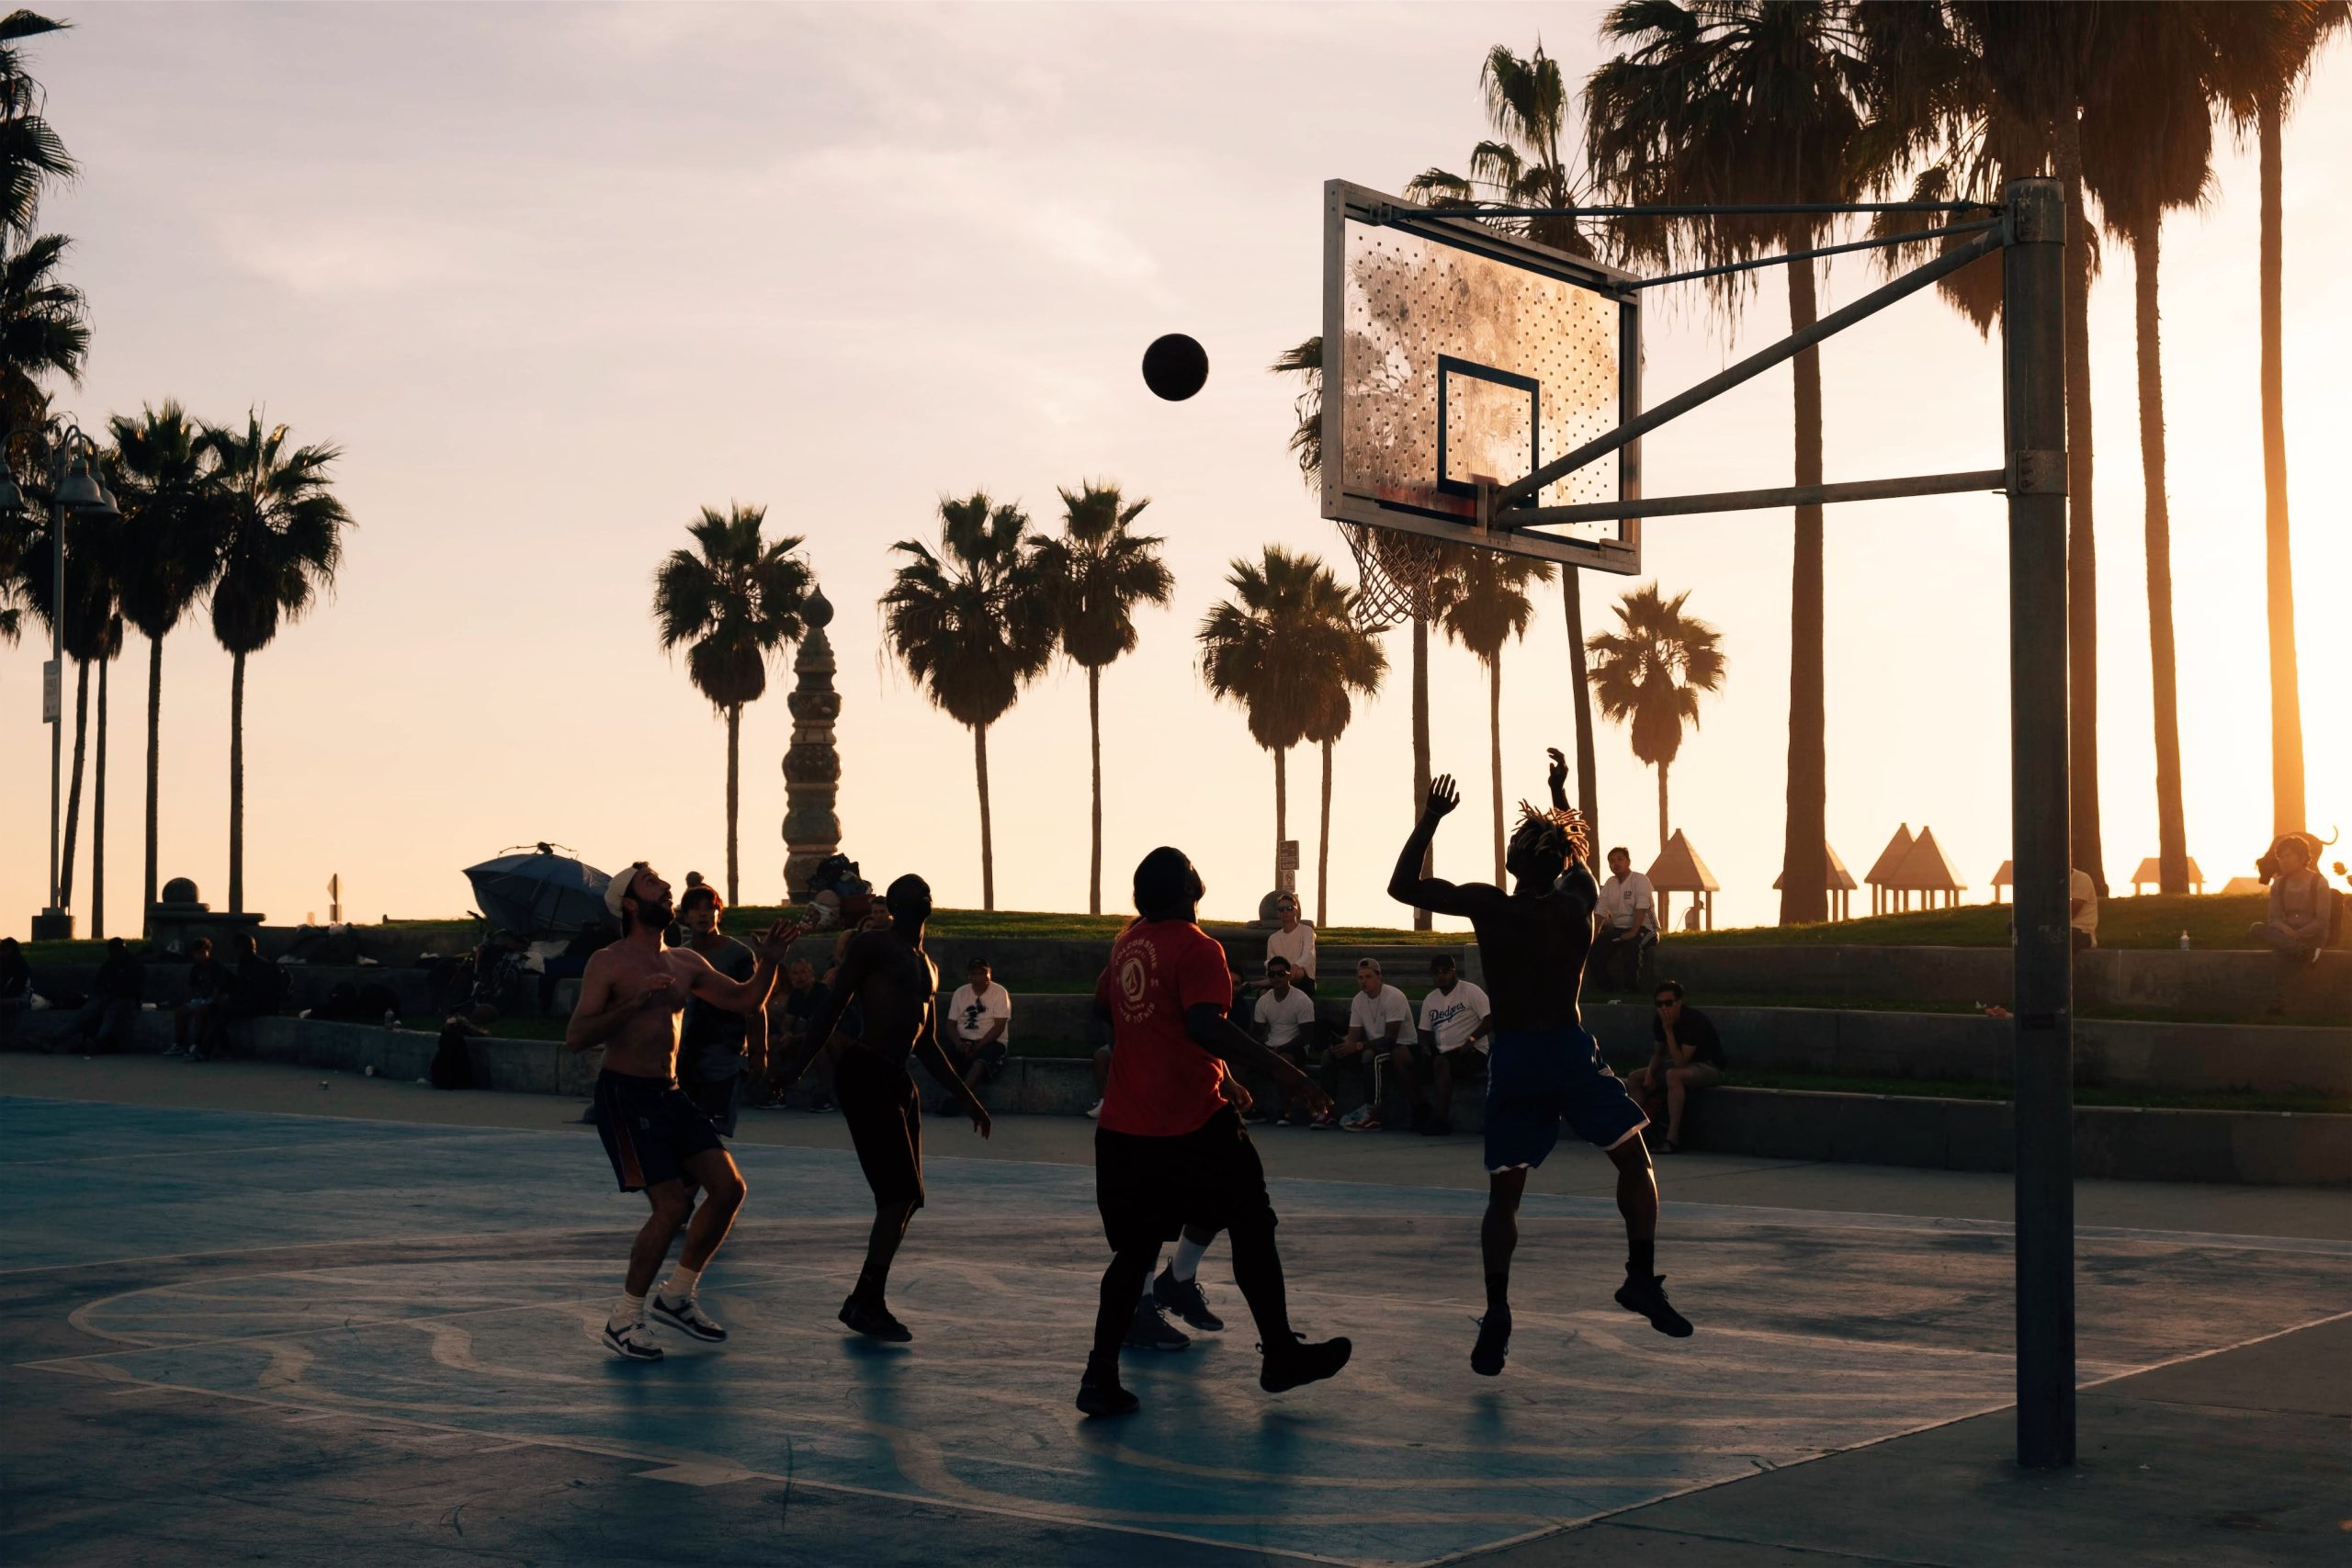 An image of people playing intramural sports shows a group throwing a basketball at sunset.